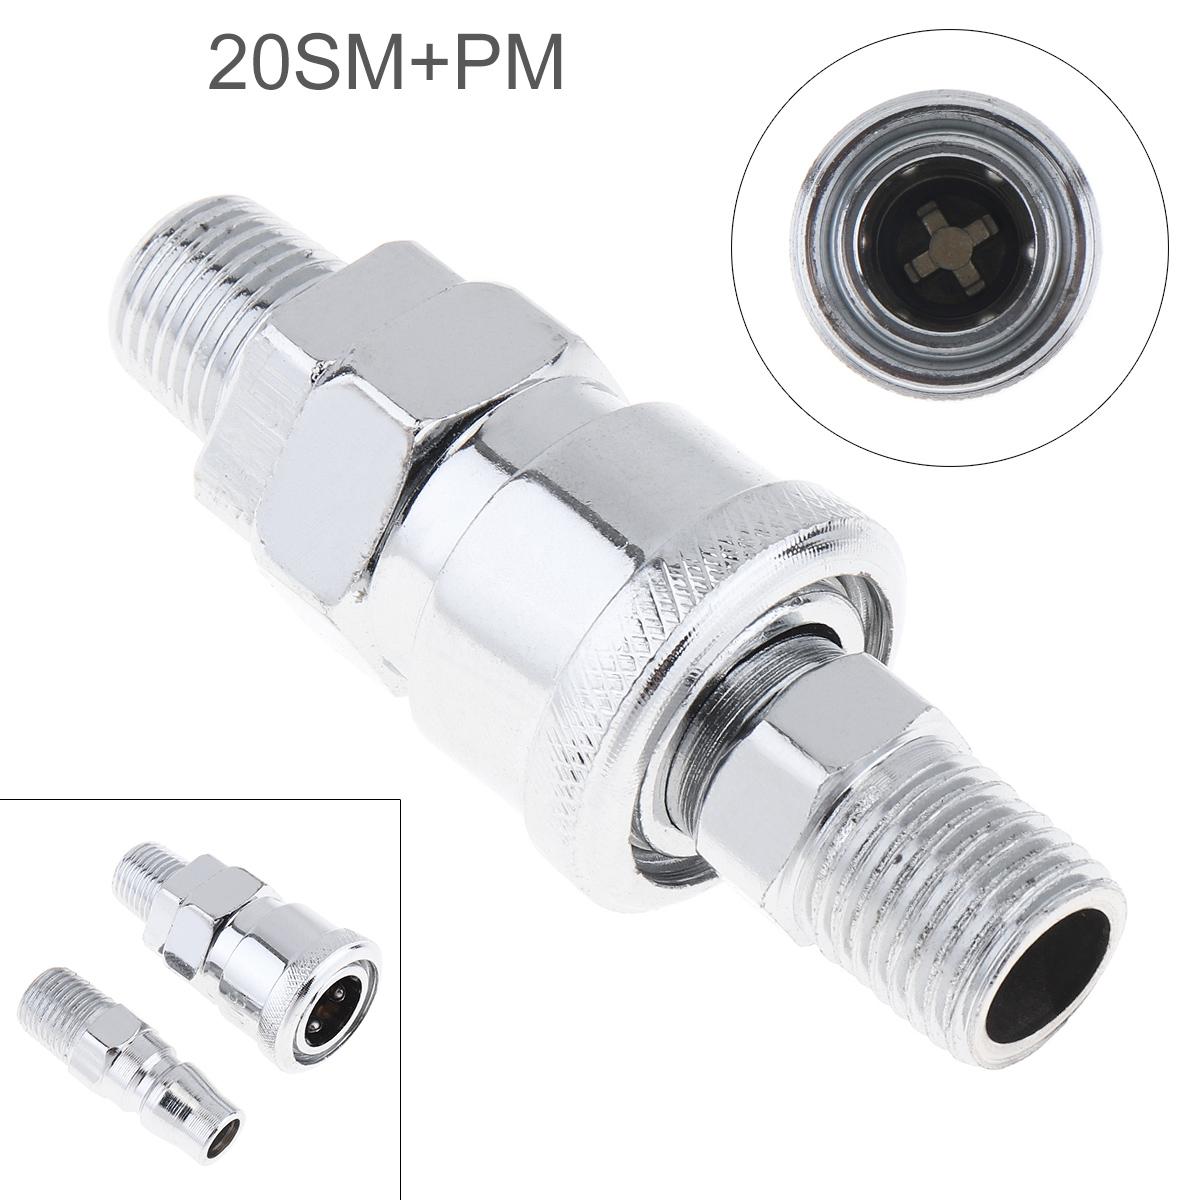 2pcs 20SH+PH Pneumatic Fitting Quick High Pressure Connector for Air Compressor 